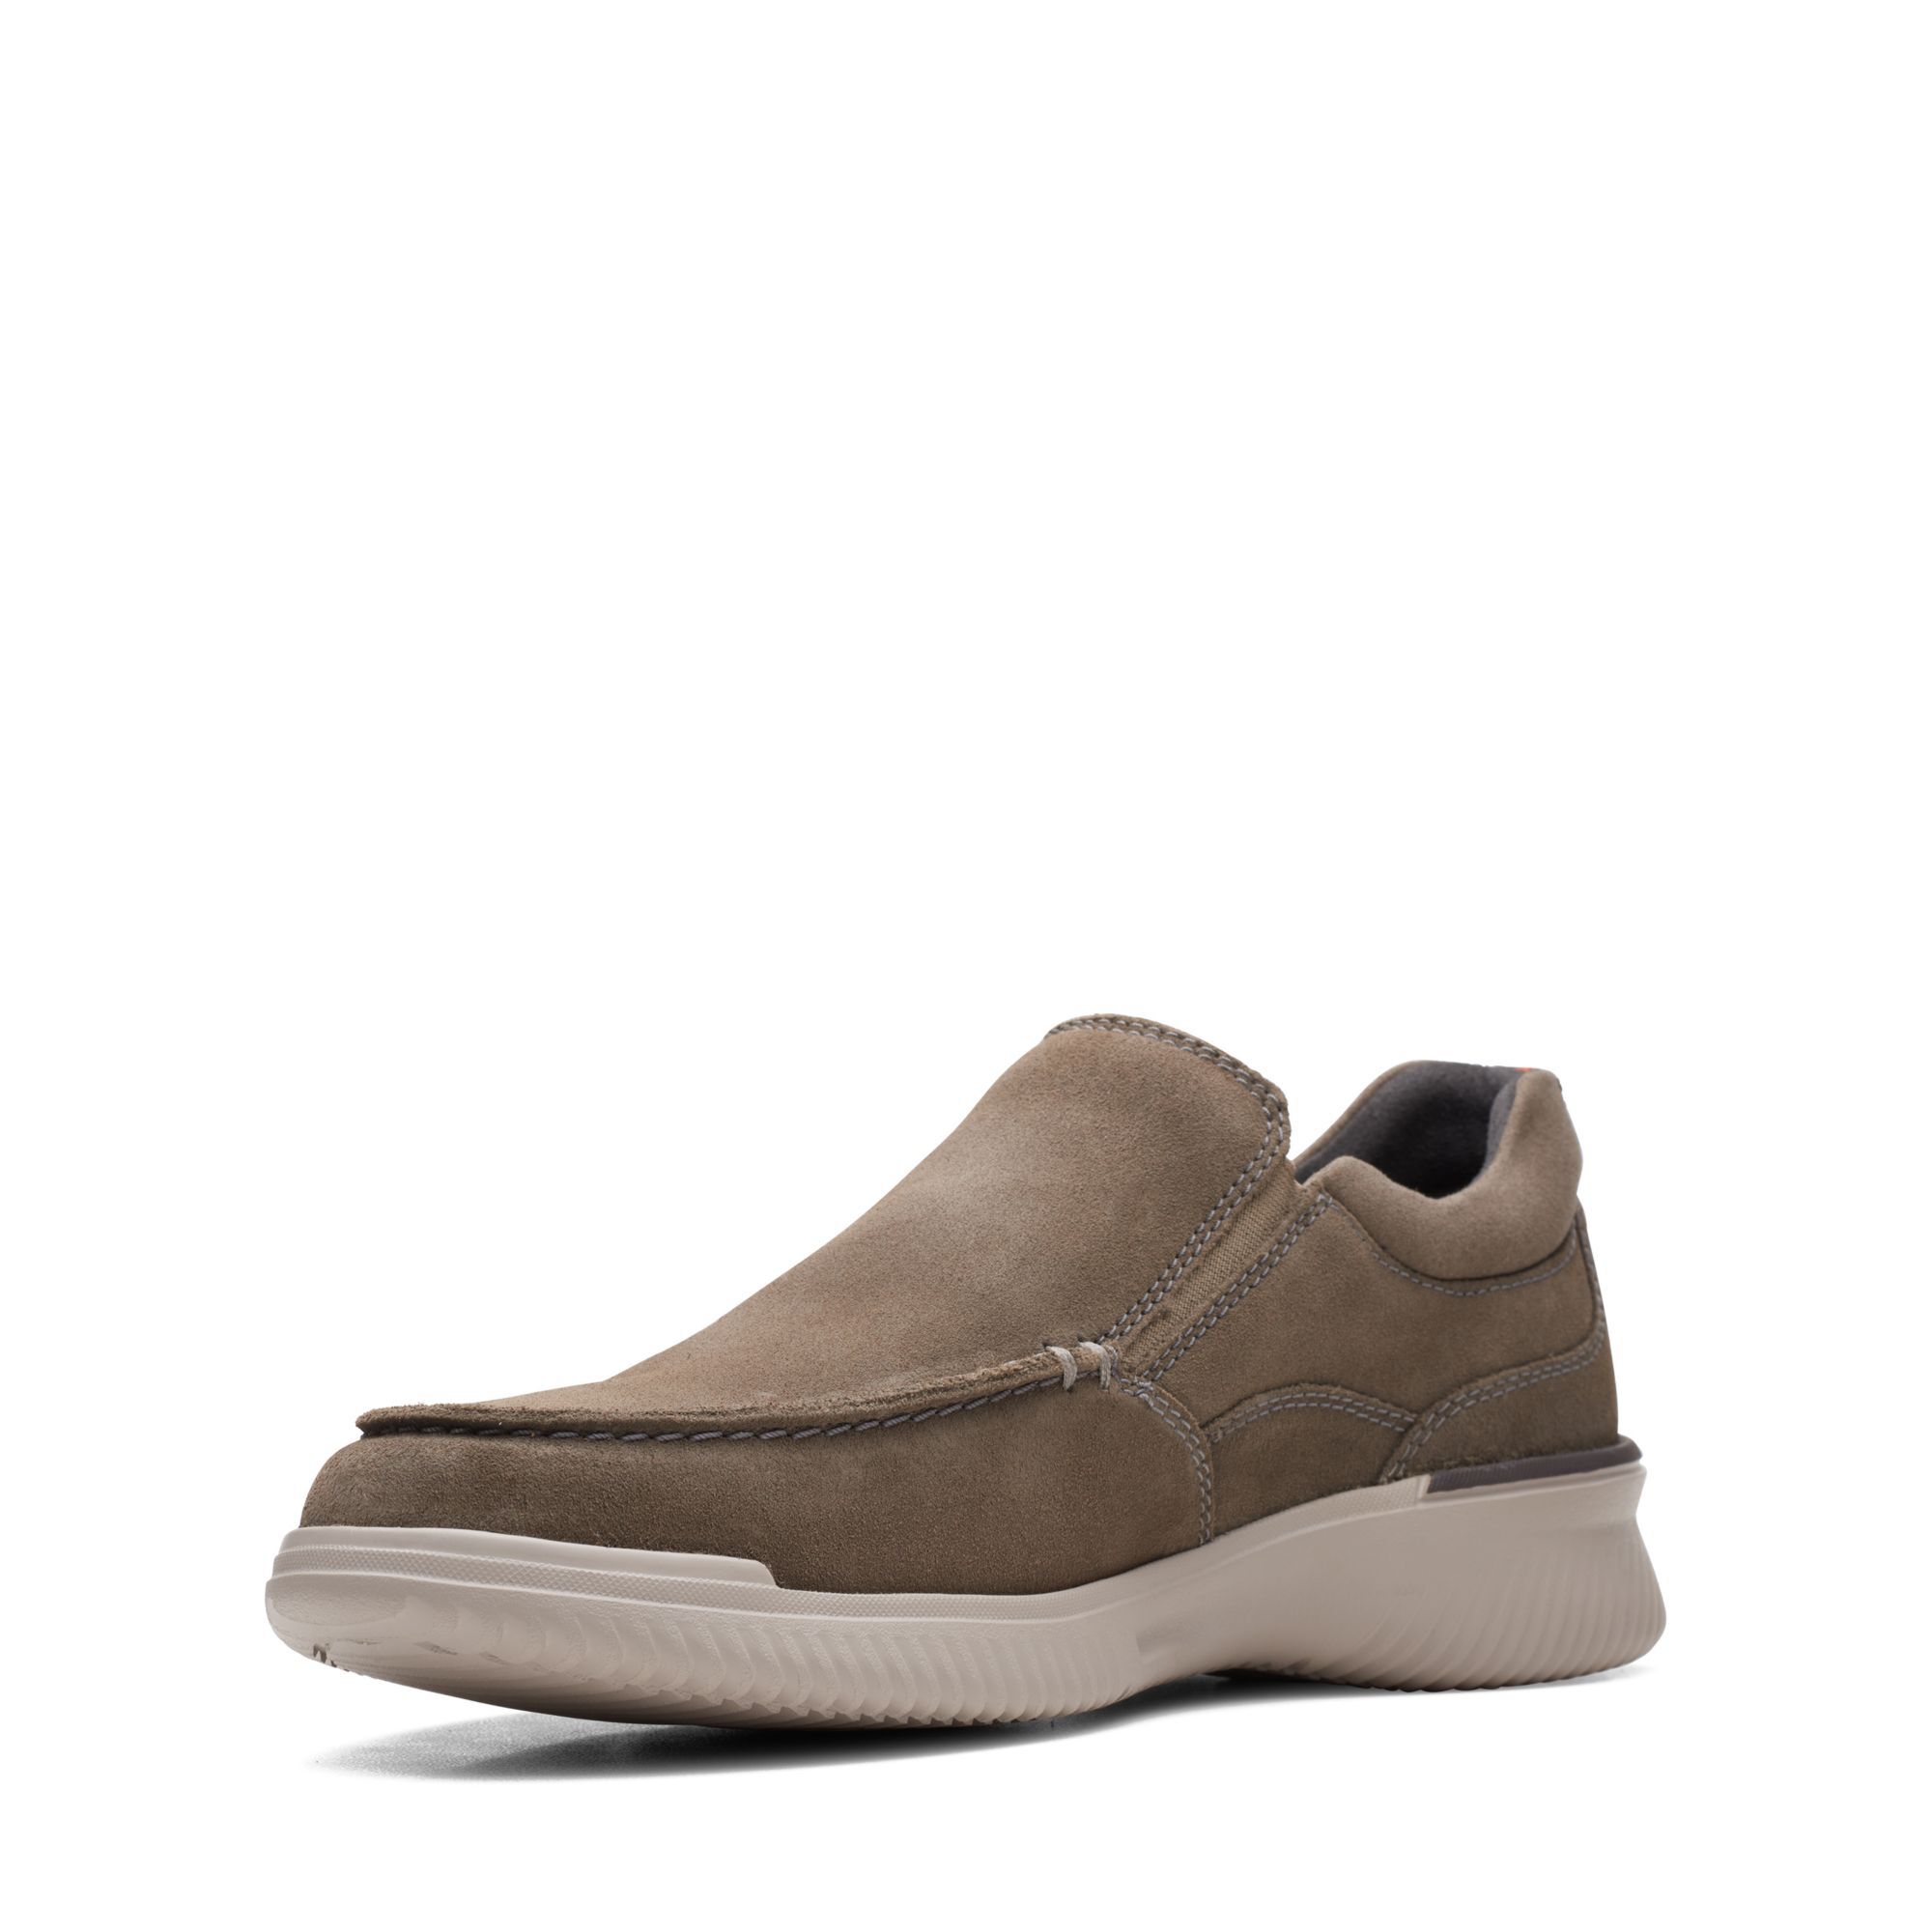 Clarks Donaway Free - Stone suede leather